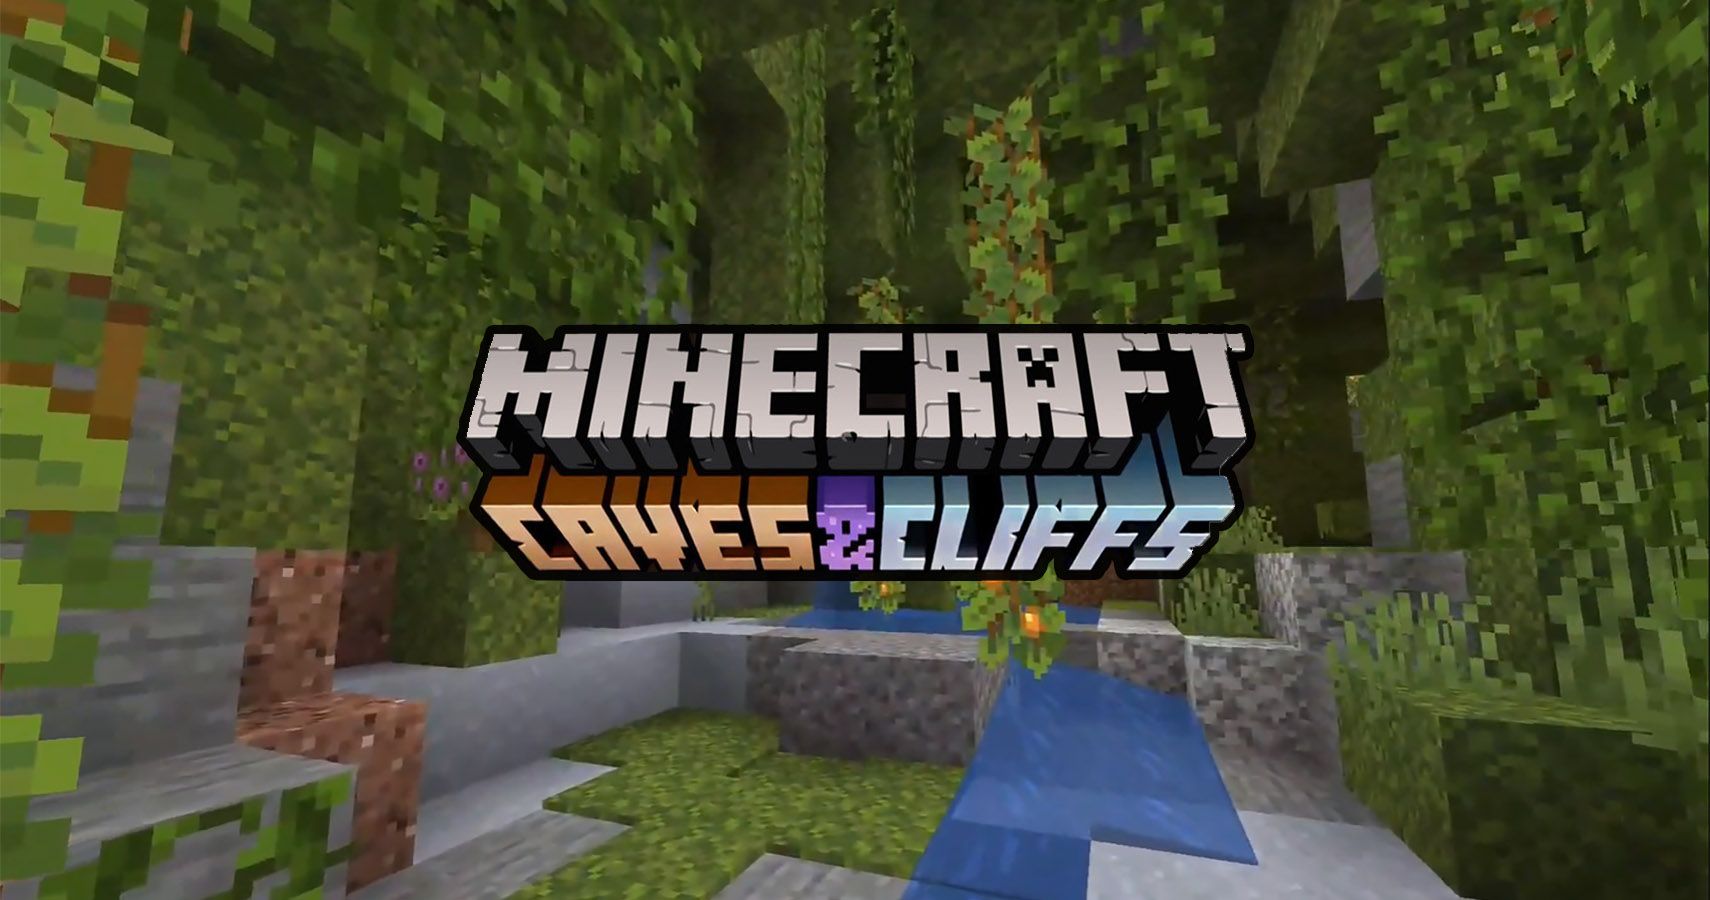 Mesh Caves will be in the Caves and Cliffs update to Minecraft